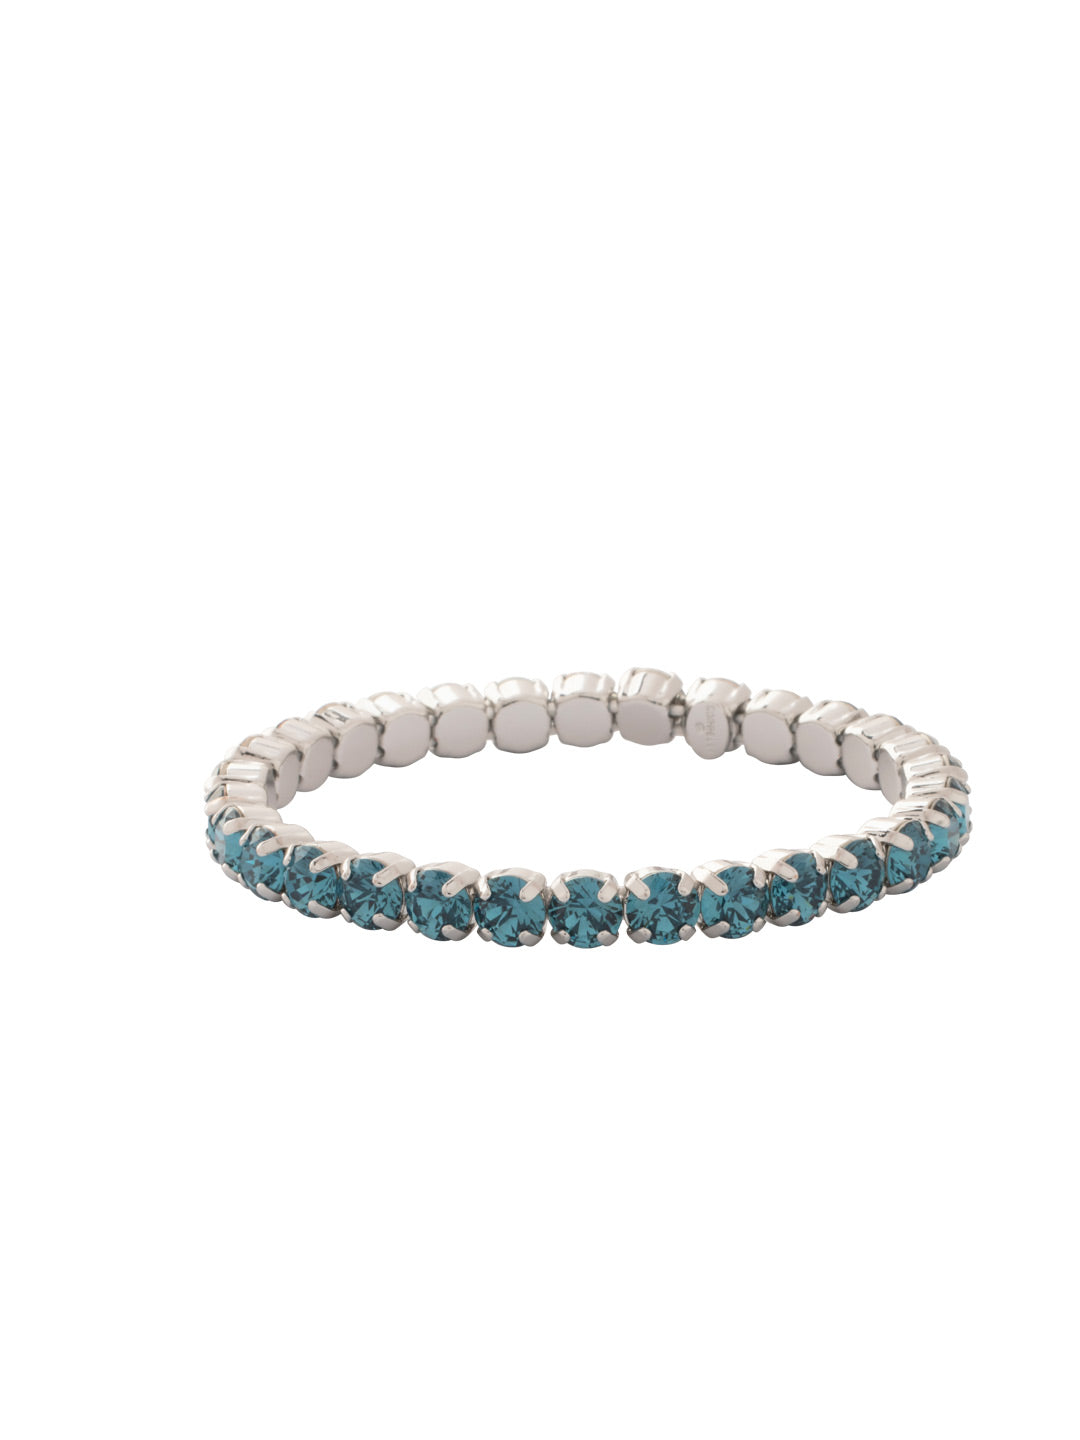 Mini Sienna Stretch Bracelet - BFD52PDMON - <p>The Mini Sienna Stretch Bracelet is a mini take on a bestselling style! The Mini Sienna Stretch Bracelet features a line of small round crystals on a sturdy jewelers' filament, stretching to fit most wrists comfortably, without the hassle of a clasp! From Sorrelli's Montana collection in our Palladium finish.</p>